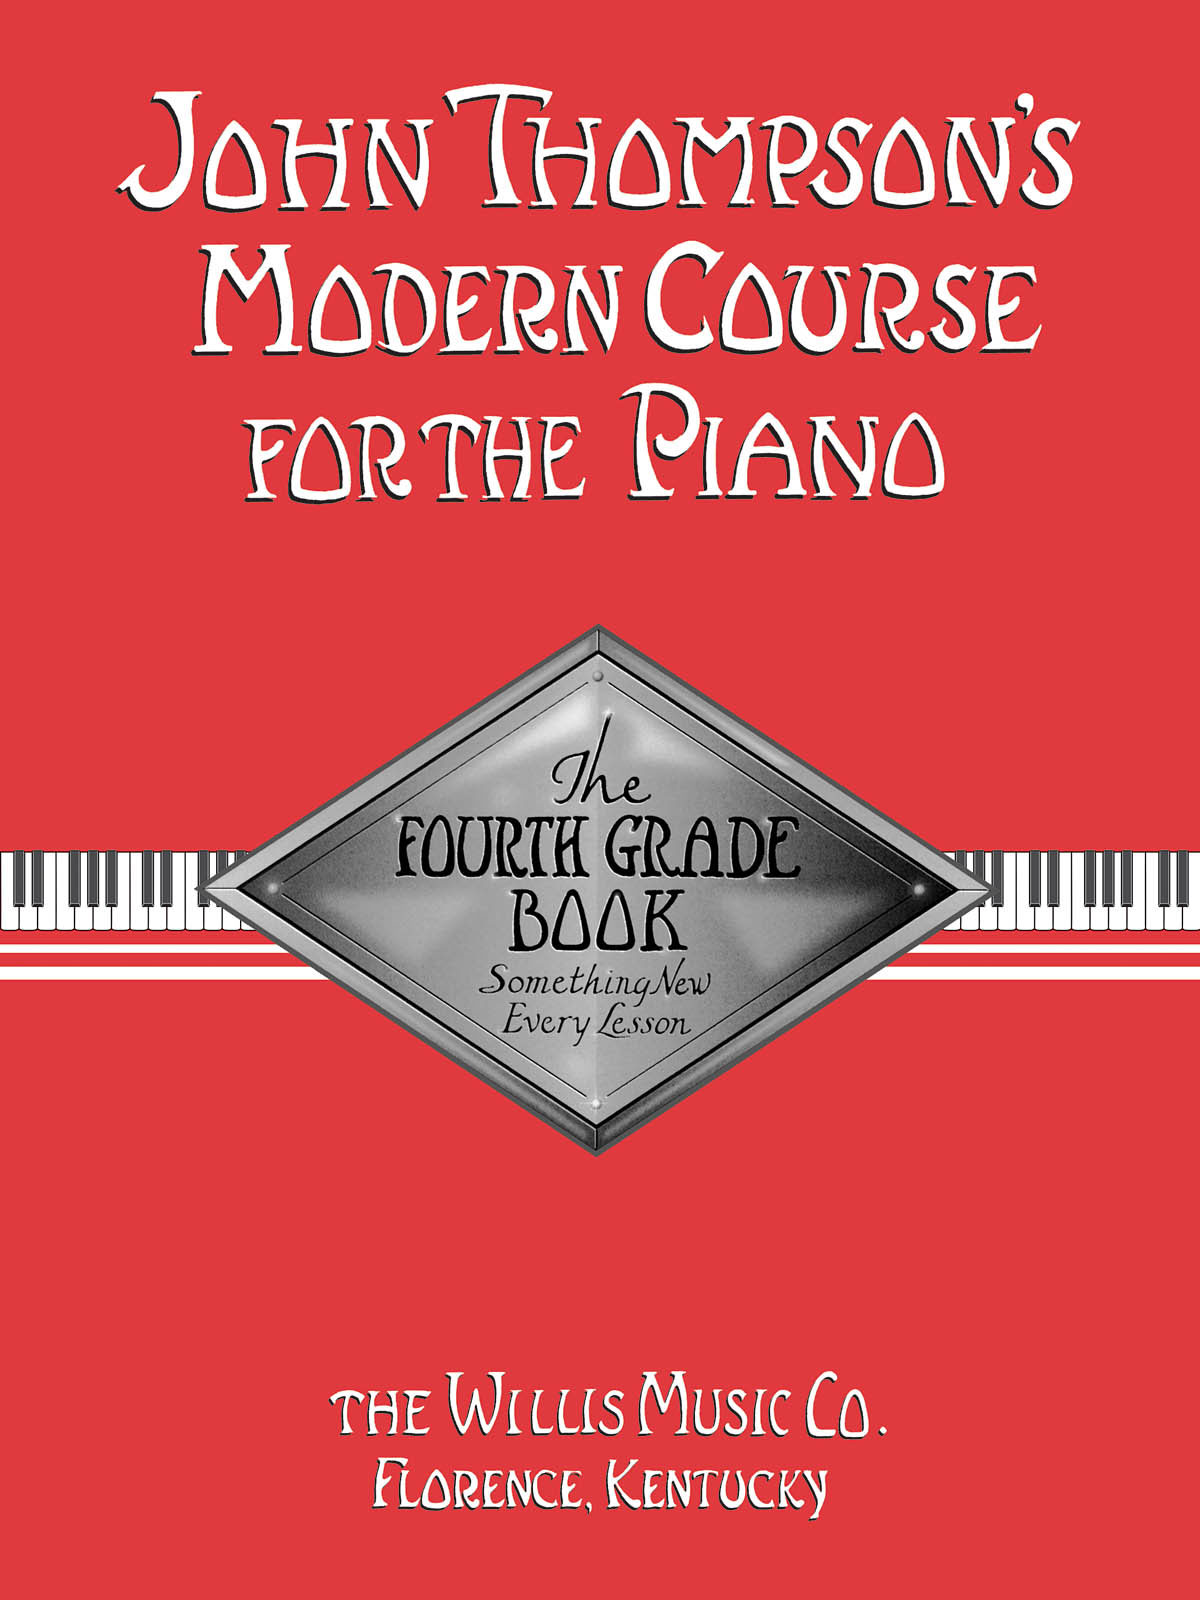 THE WILLIS MUSIC COMPANY THOMPSON J. - MODERN COURSE FOR THE PIANO - THE FOURTH GRADE BOOK